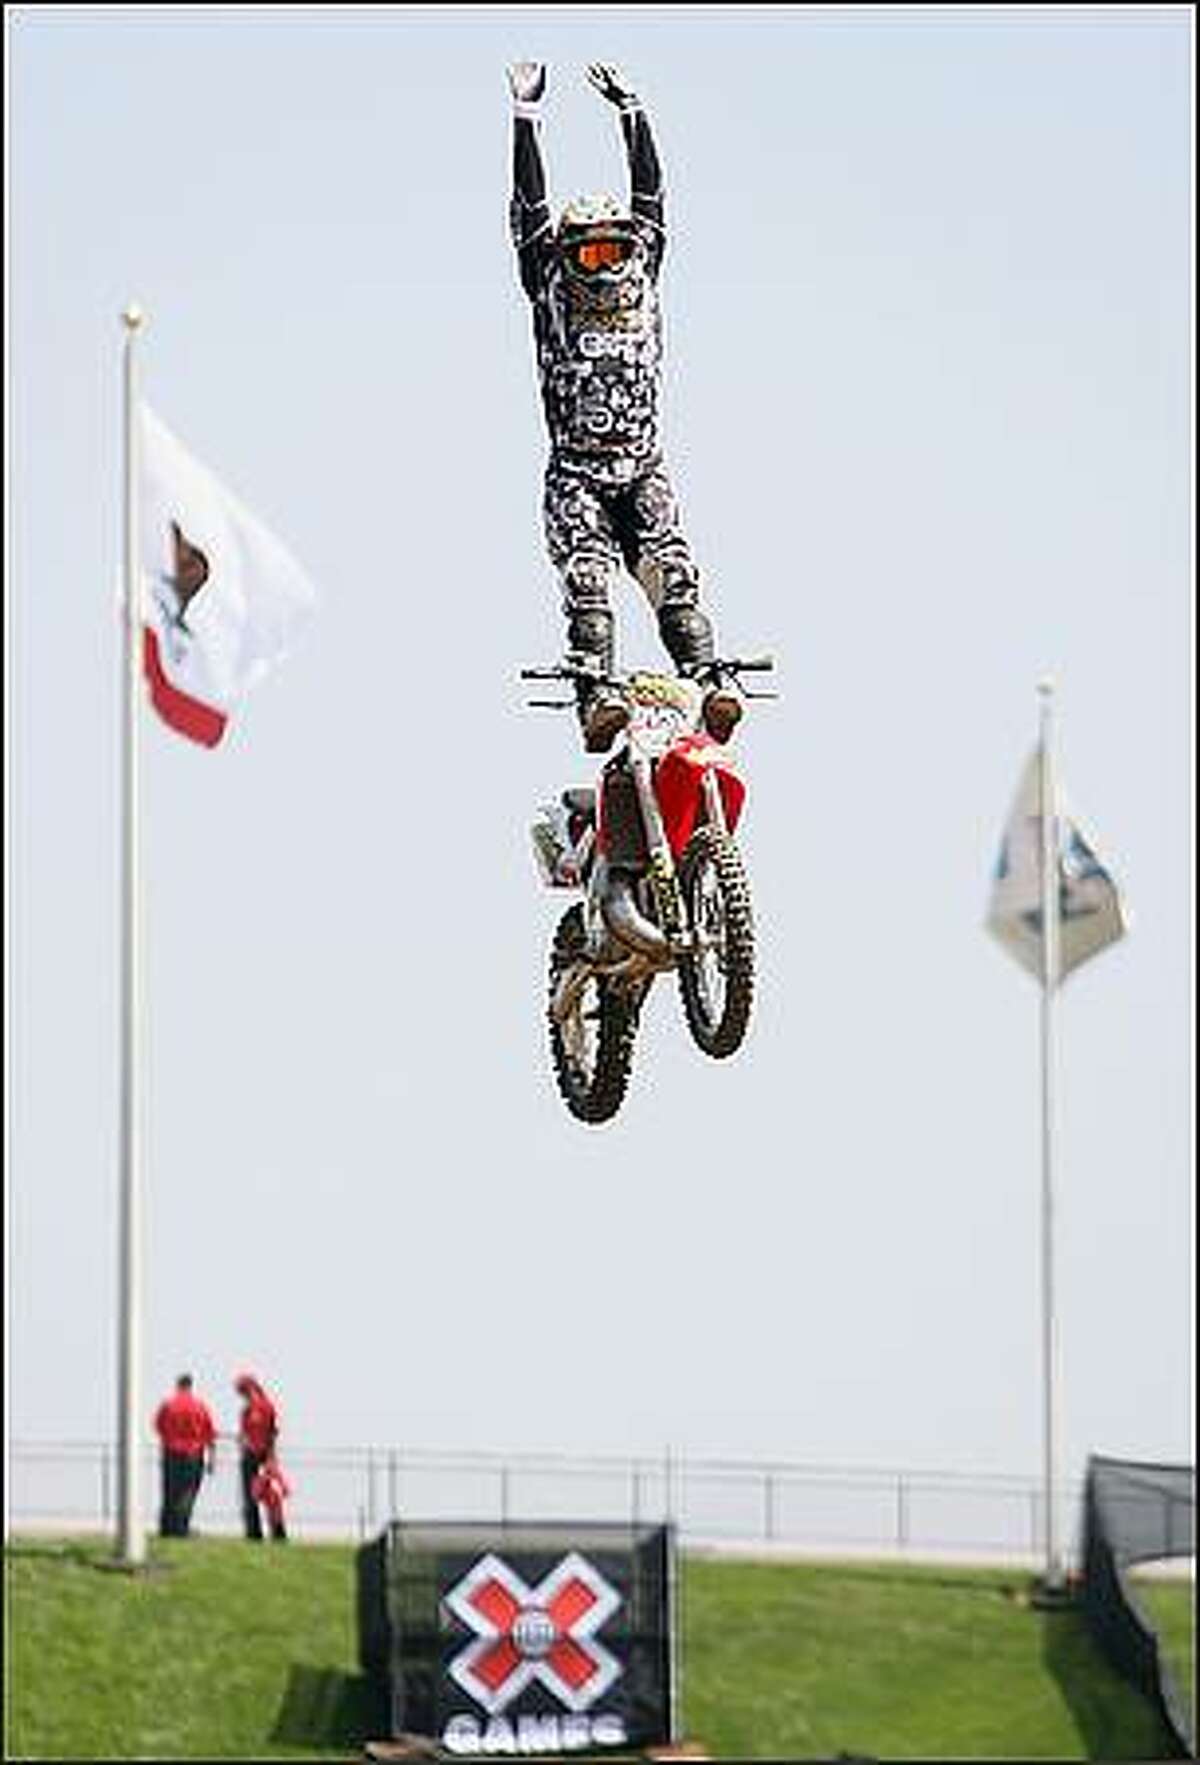 Ronnie Faisst practices in the Moto X Freestyle during the summer X Games 14 at Home Depot Center in Carson, California. (Photo by Christian Petersen/Getty Images)